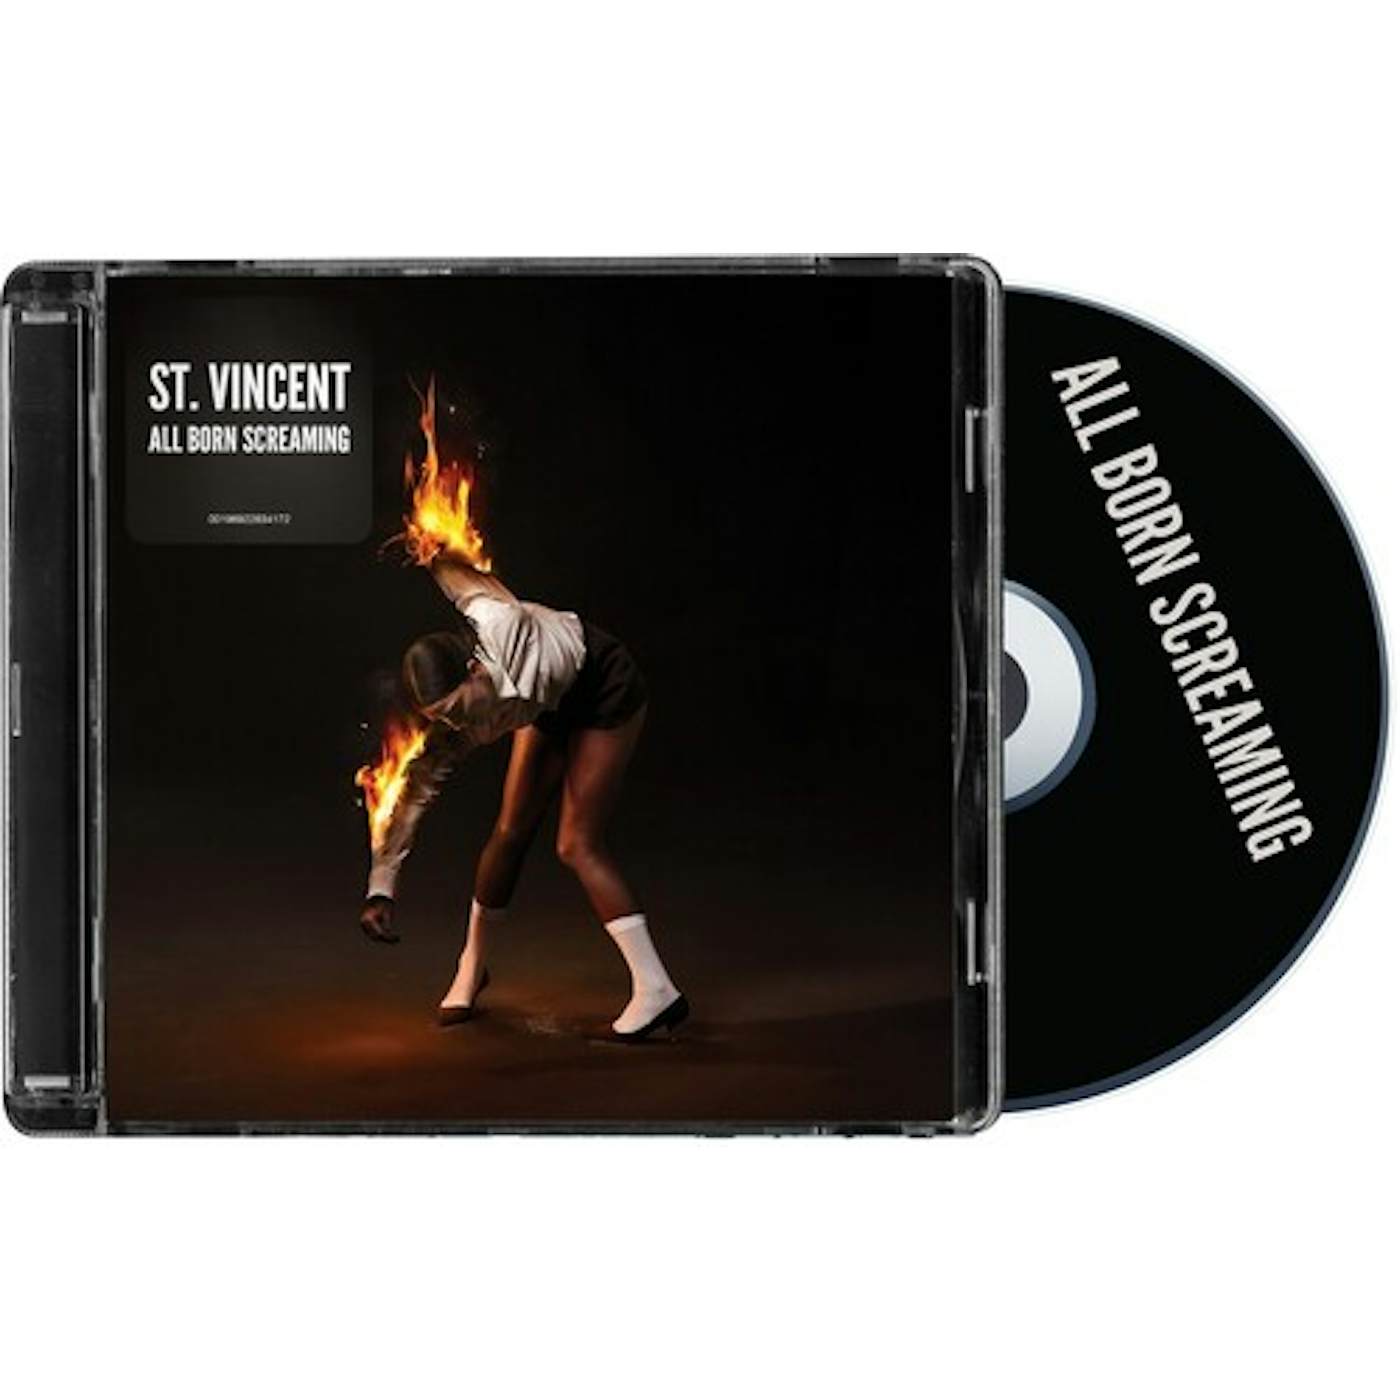 St. Vincent ALL BORN SCREAMING CD